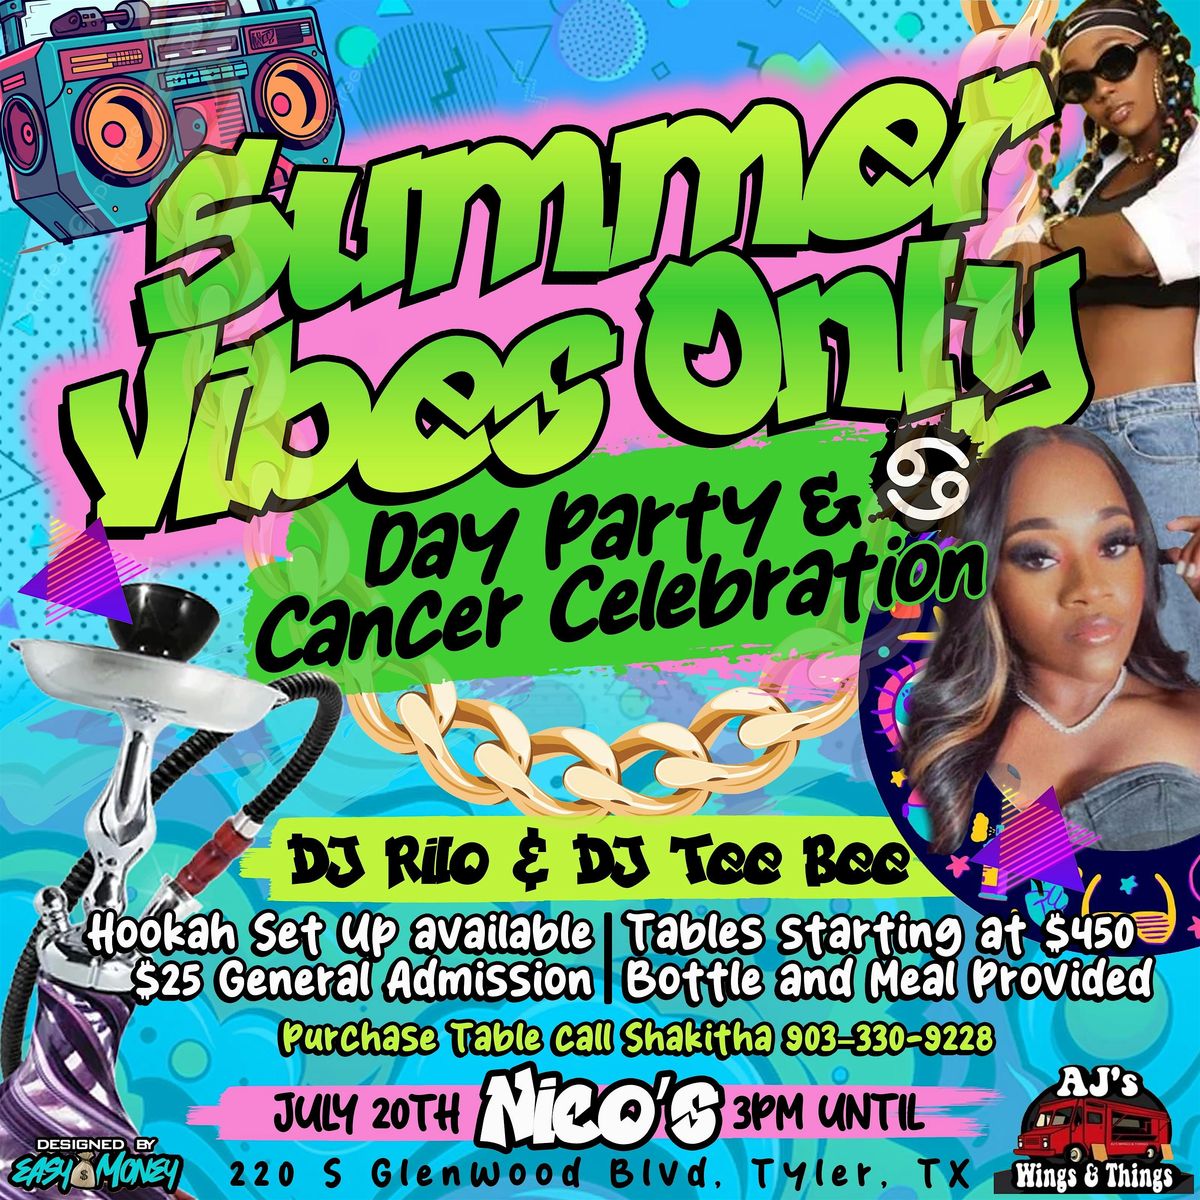 Summer Vibe\u2019s Only Day Party